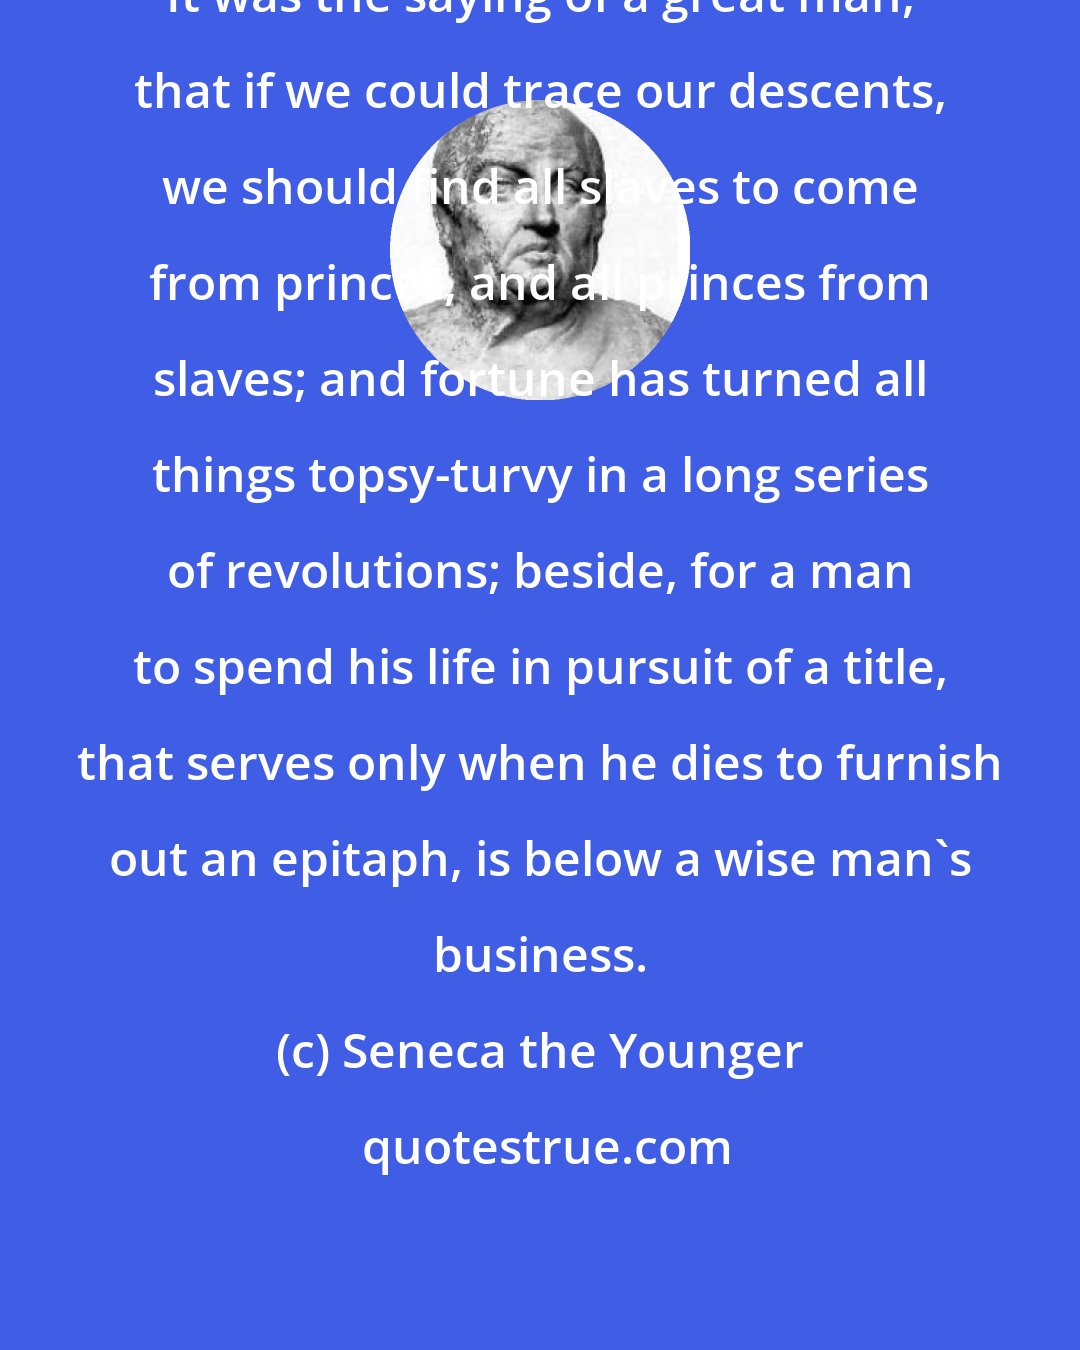 Seneca the Younger: It was the saying of a great man, that if we could trace our descents, we should find all slaves to come from princes, and all princes from slaves; and fortune has turned all things topsy-turvy in a long series of revolutions; beside, for a man to spend his life in pursuit of a title, that serves only when he dies to furnish out an epitaph, is below a wise man's business.